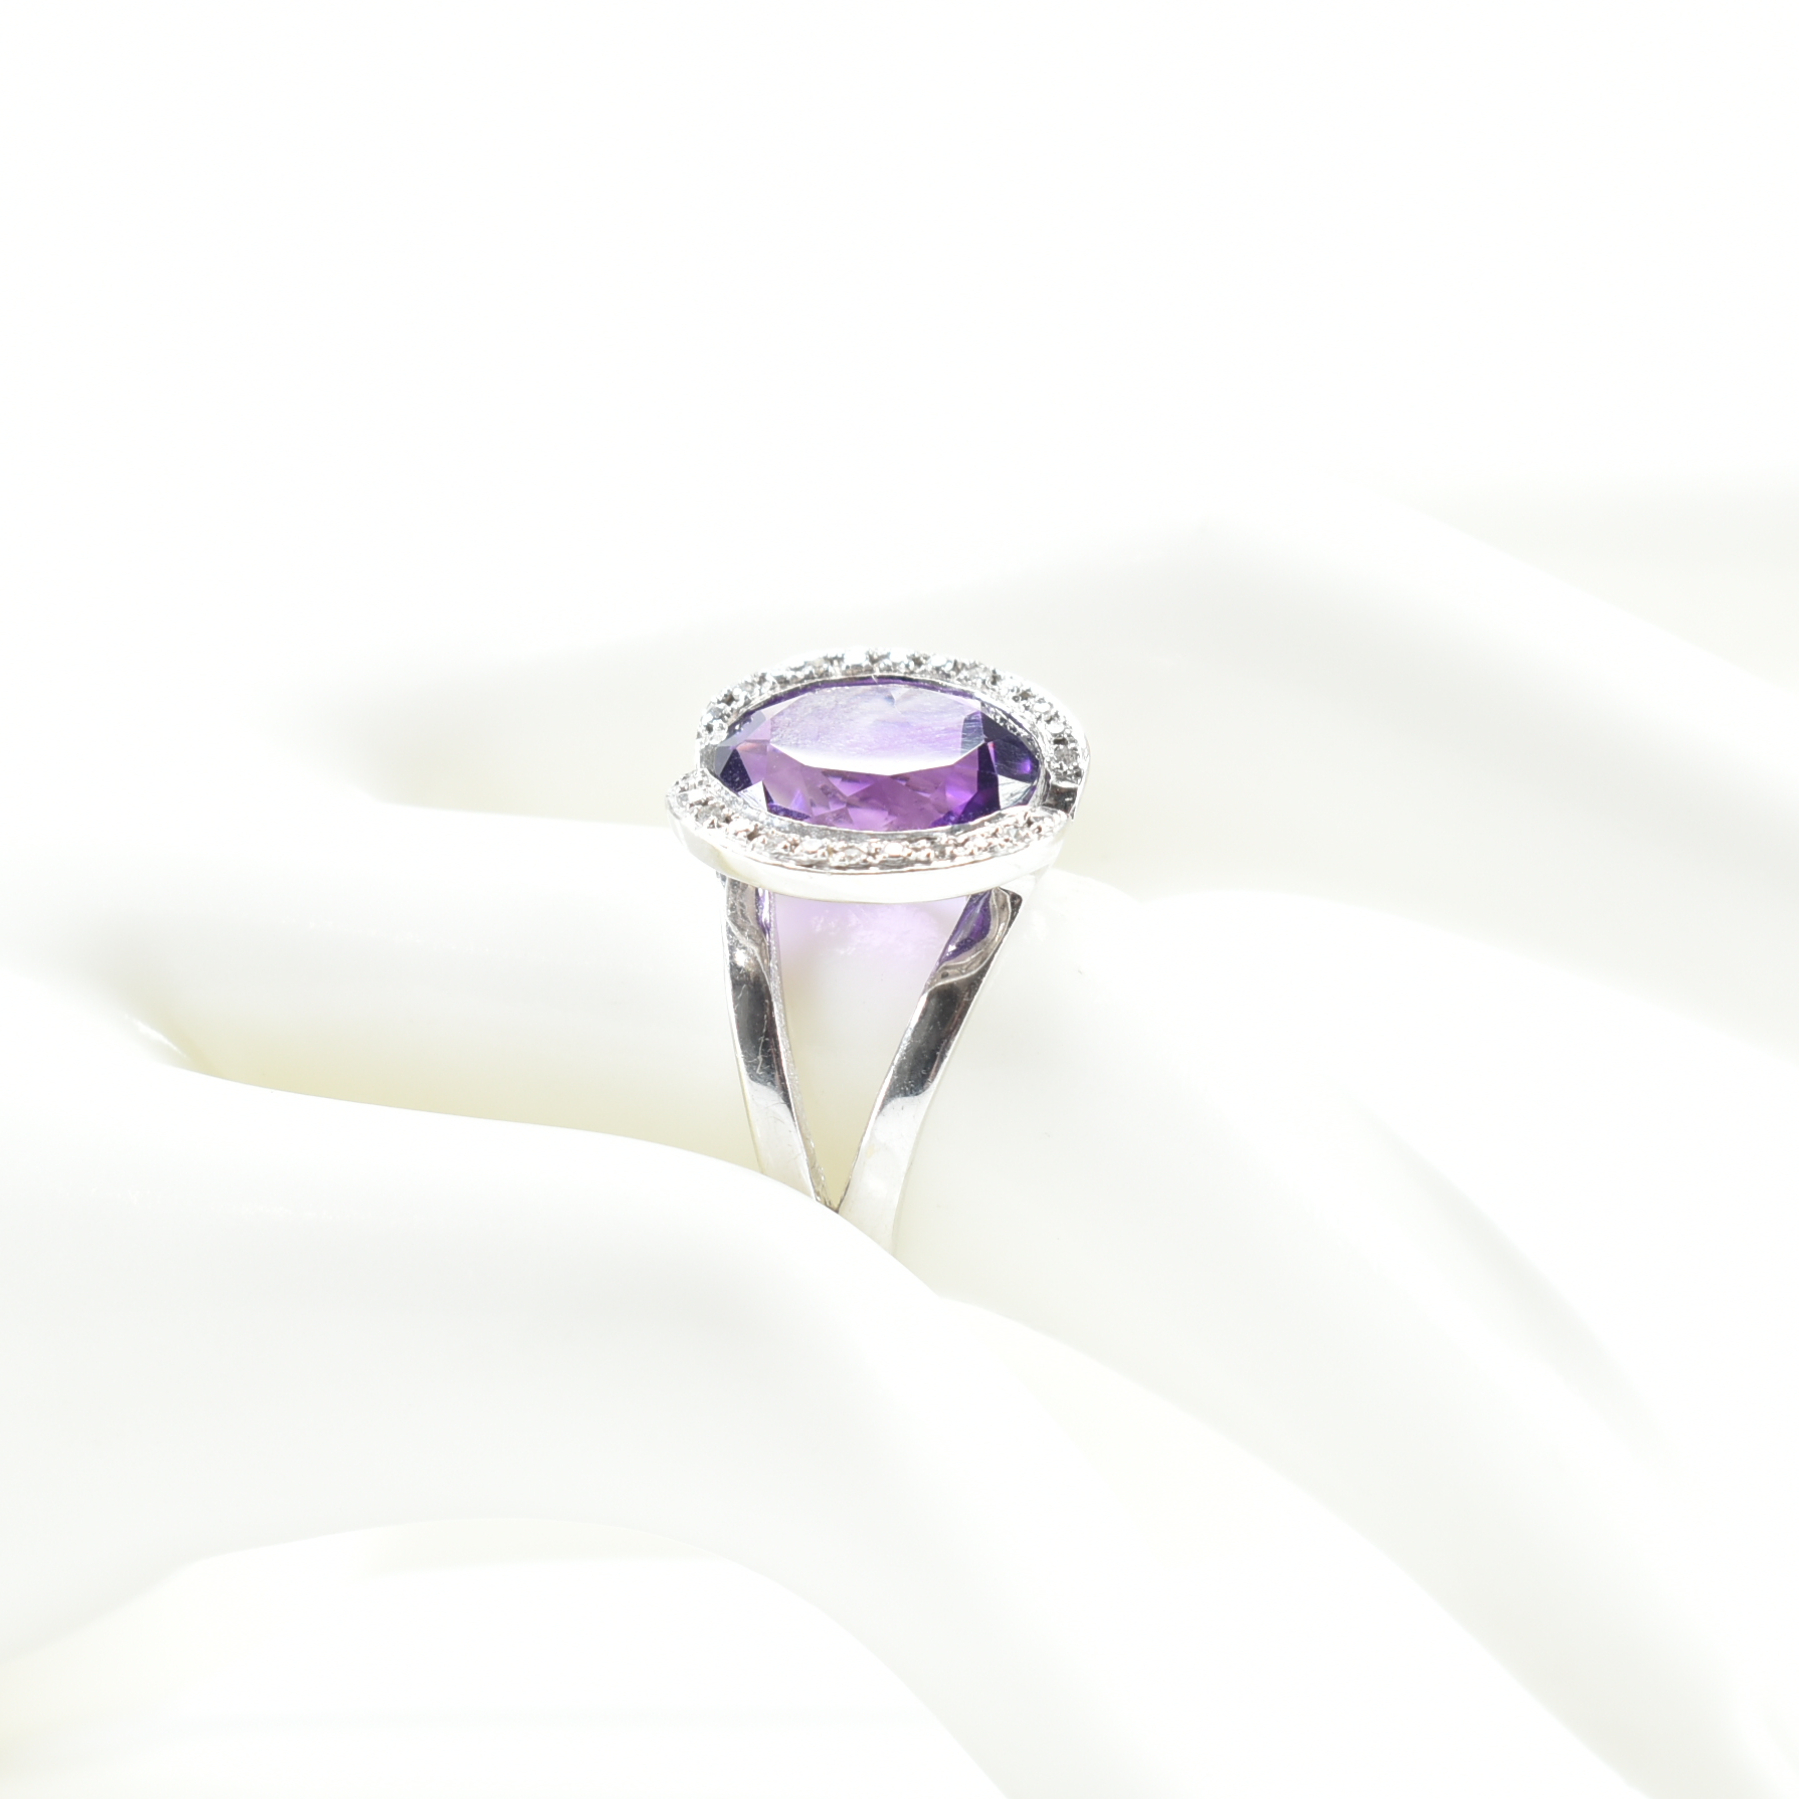 FRENCH 18CT WHITE GOLD AMETHYST & DIAMOND COCKTAIL RING - Image 9 of 9